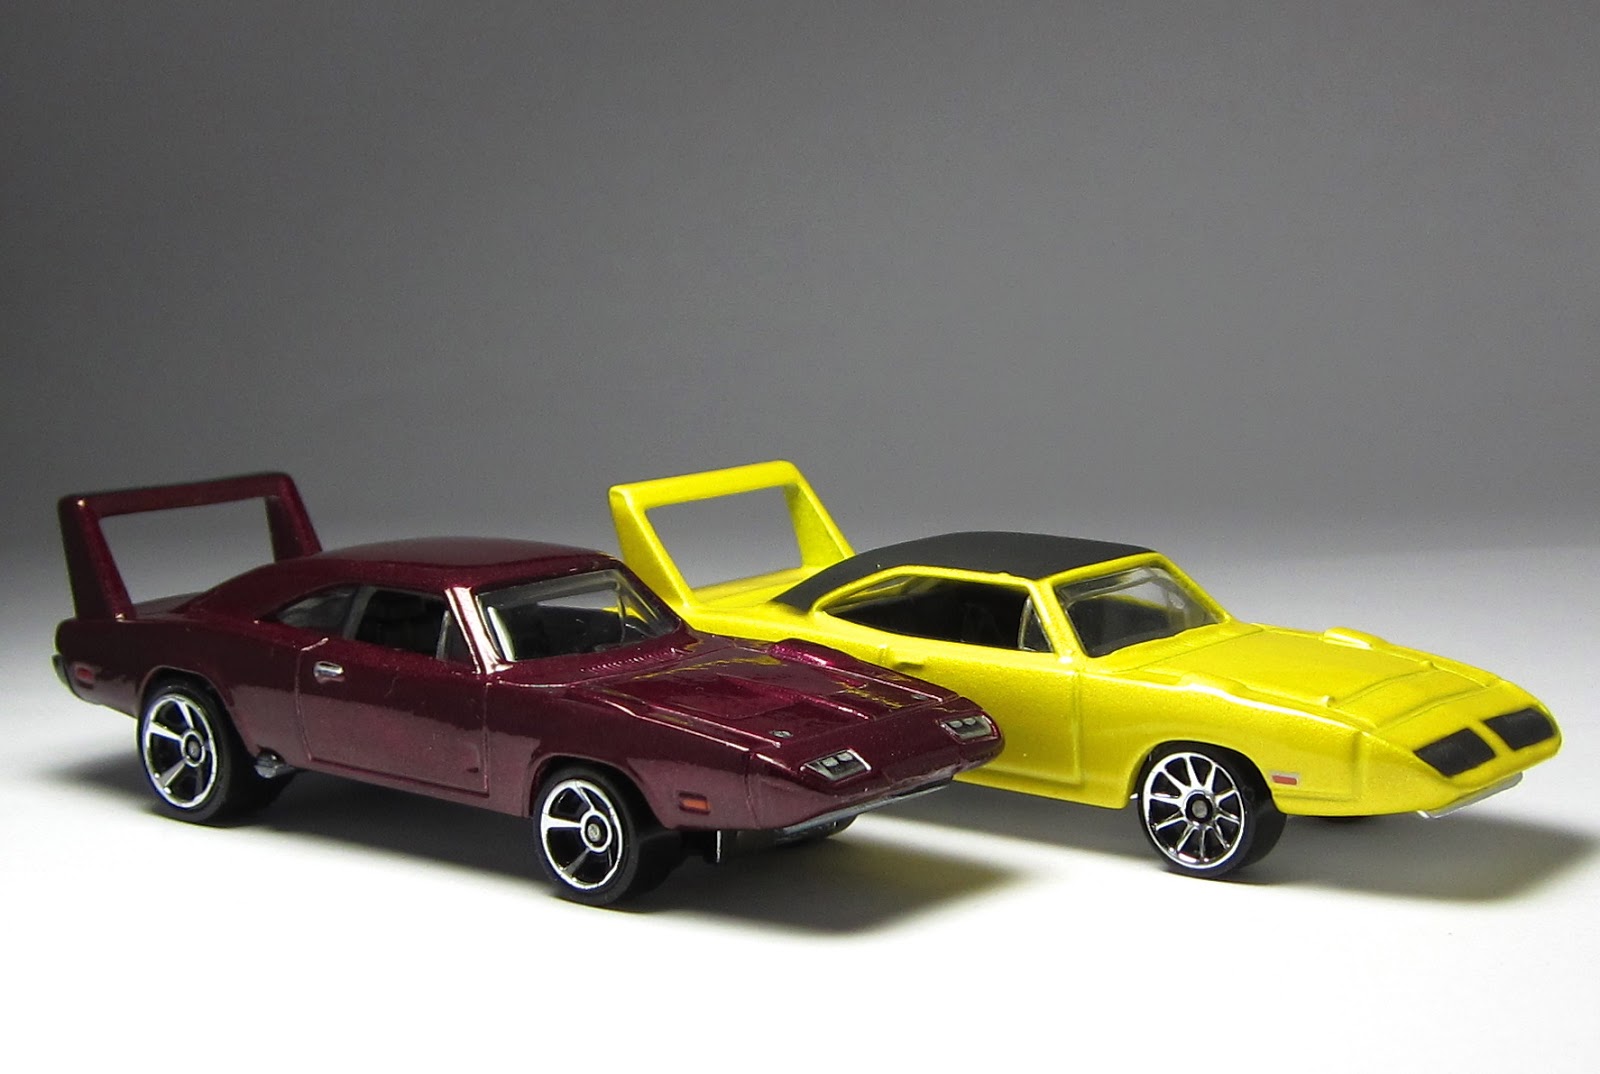 1968, Dodge, Charger, Daytona, Fast, Furious, 6, Muscle, Classic, Hot, Rod, Rods, Movie, Movies, Toy, Toys, Hotwheels, F, Jpg Wallpaper